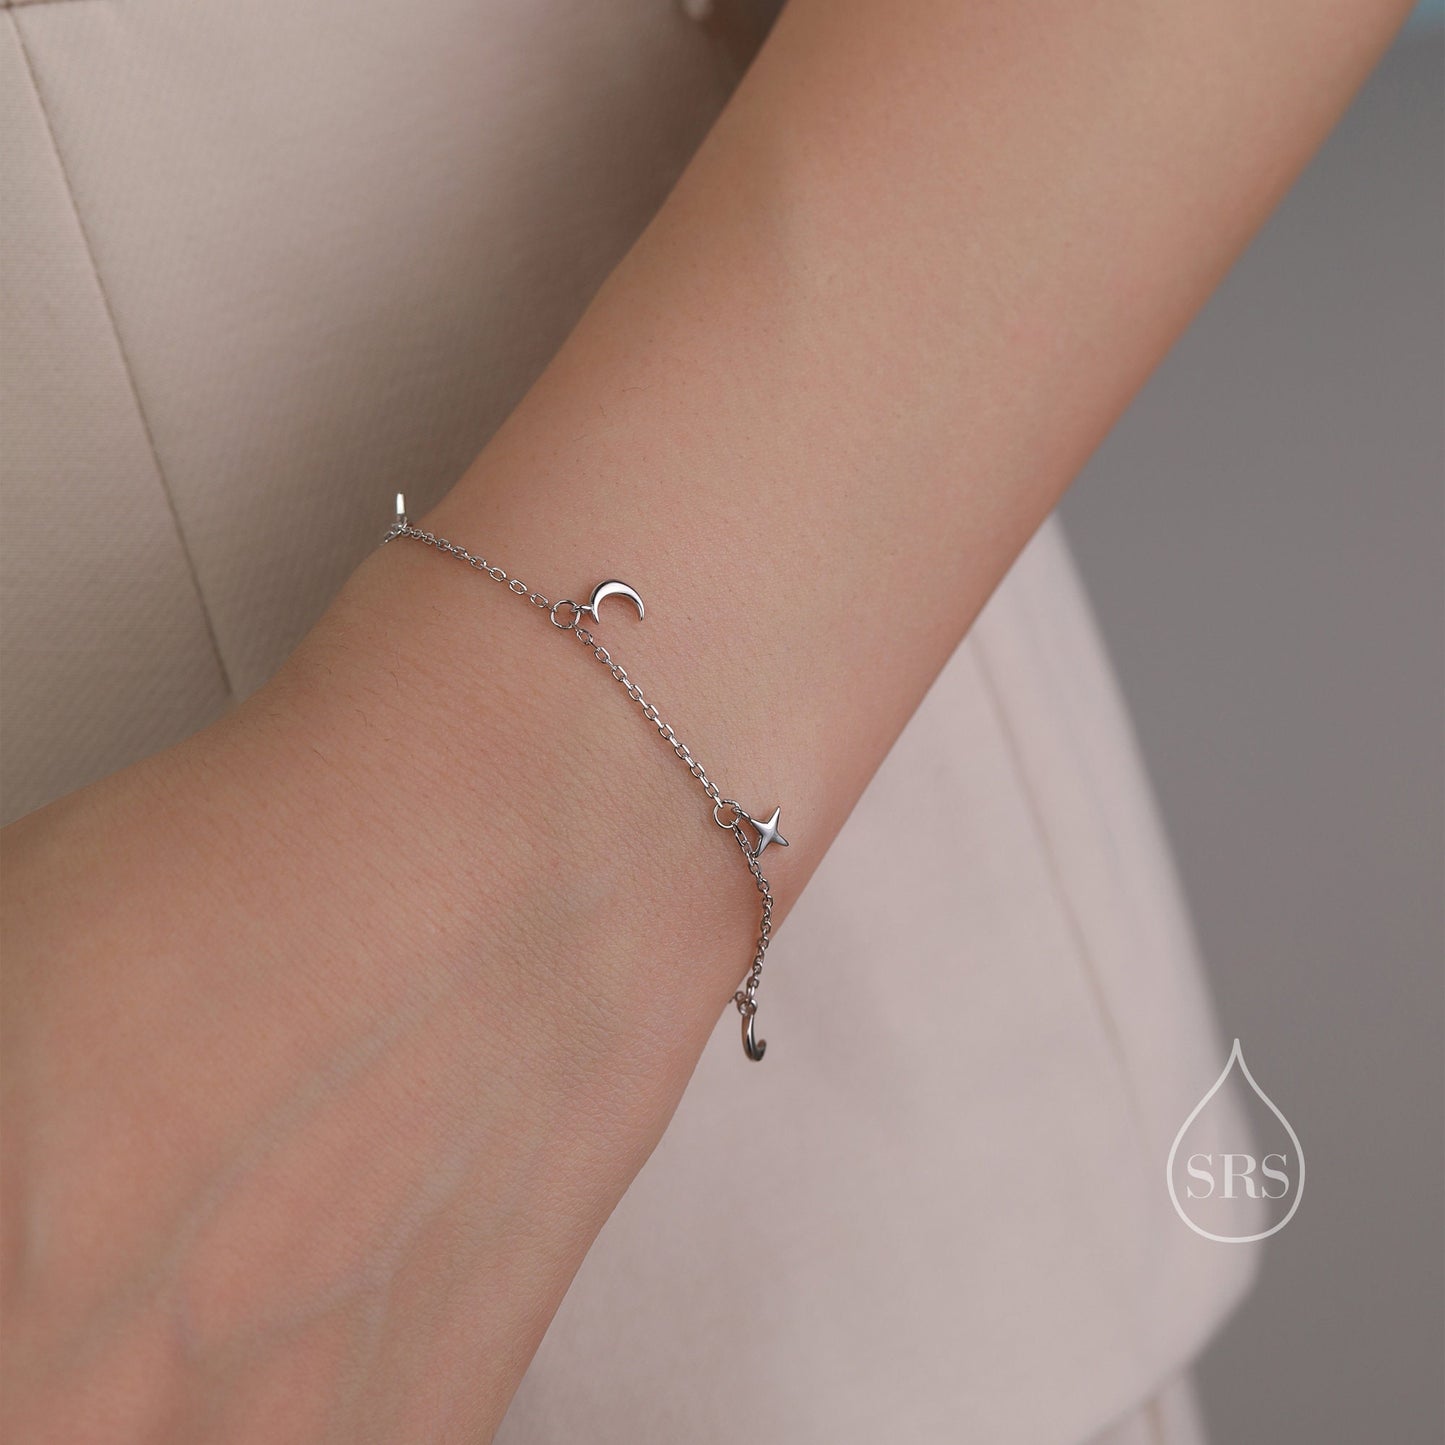 Sterling Silver Moon and Star Bracelet, Silver or Gold or Rose gold, Moon and Star Charm Bracelet, Celestial Jewellery